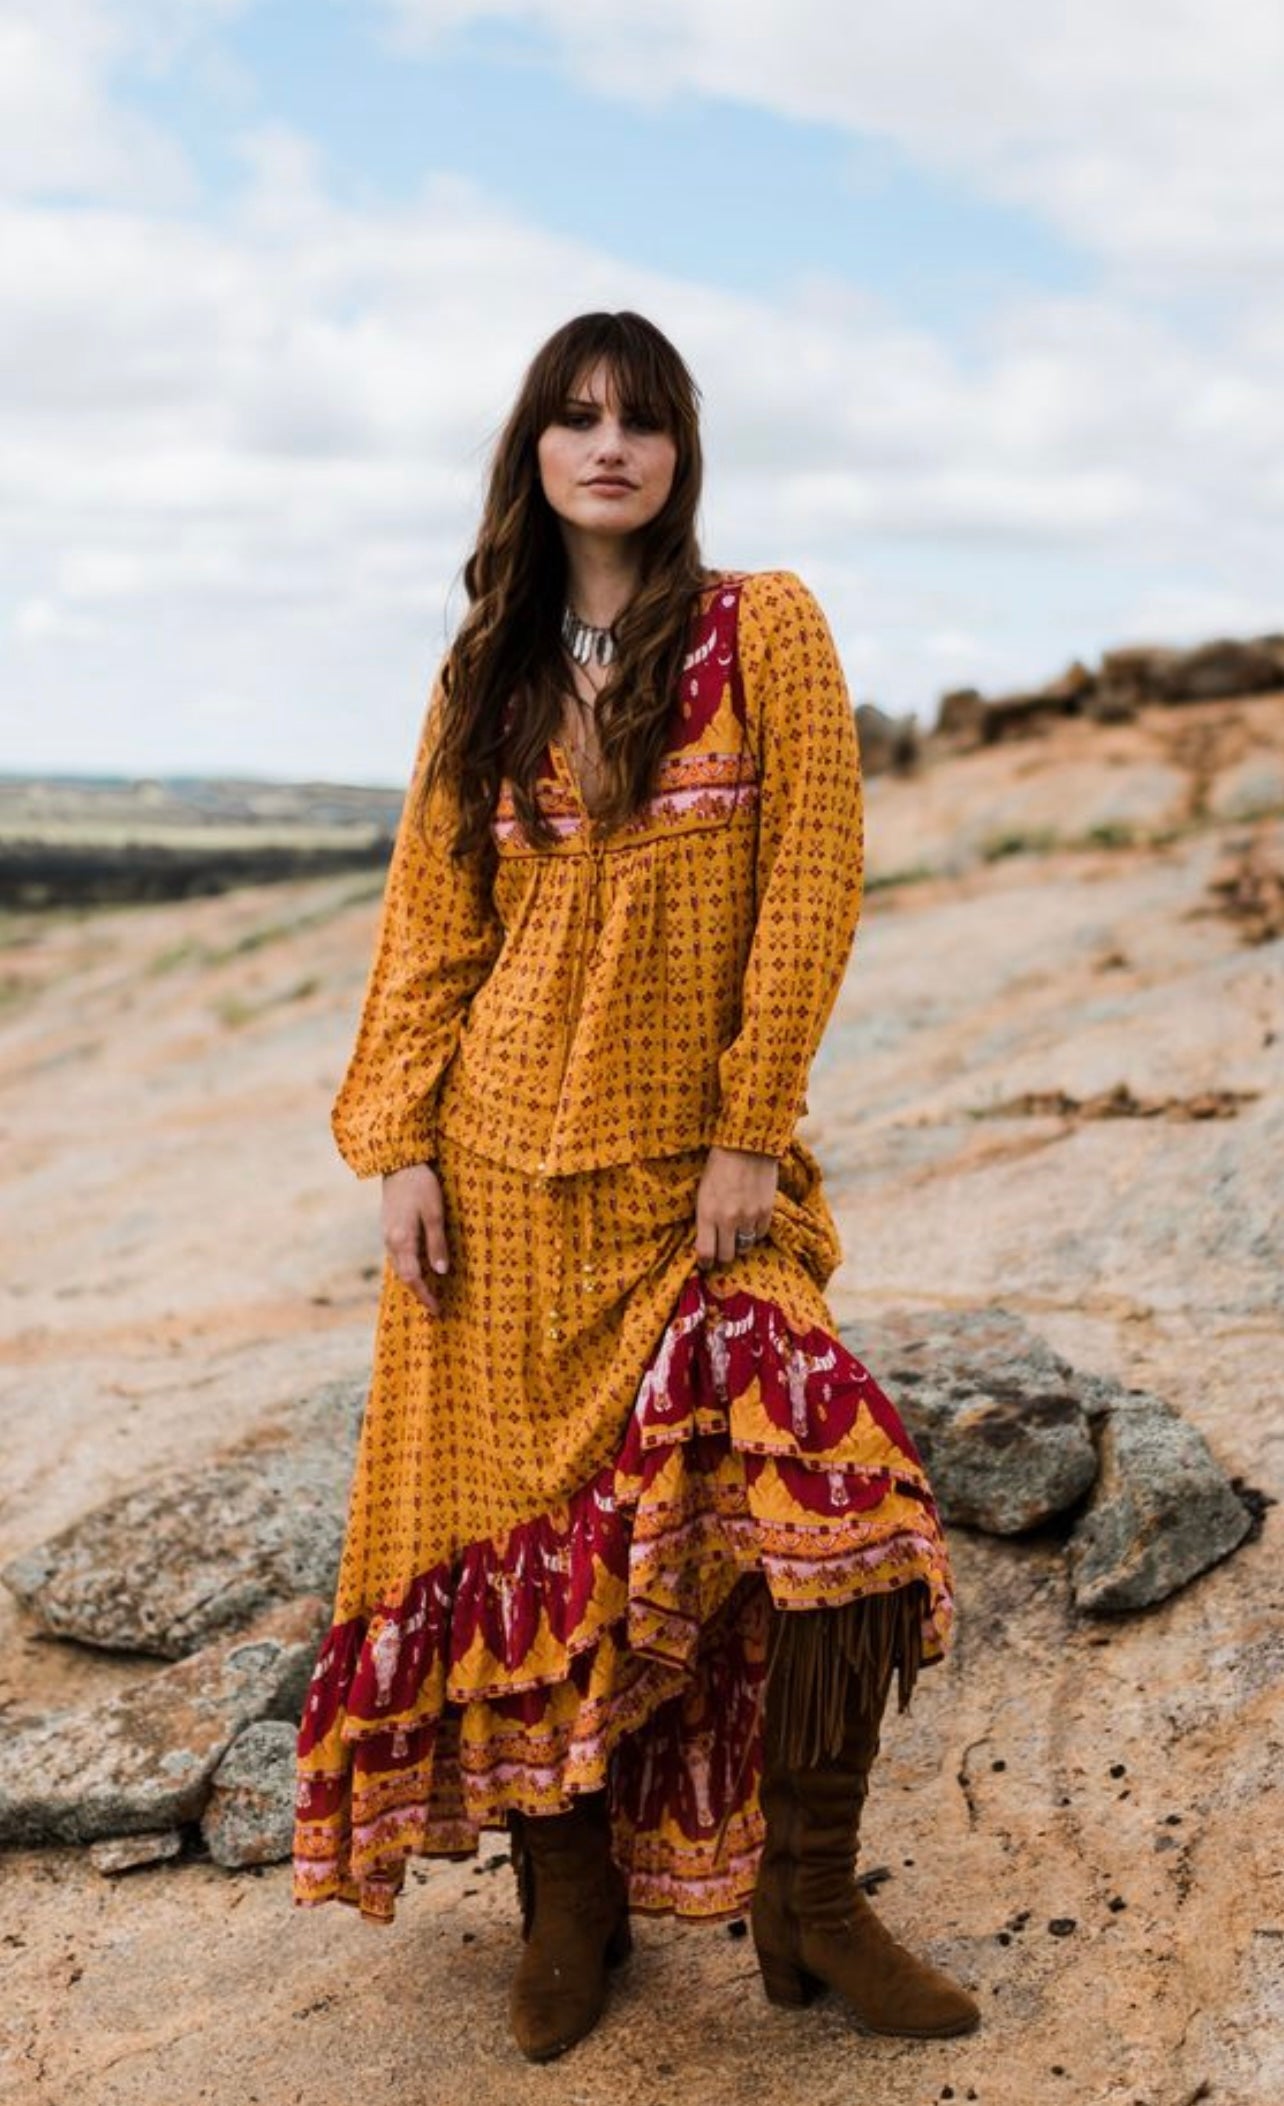 The Wild West Gypsy Blouse